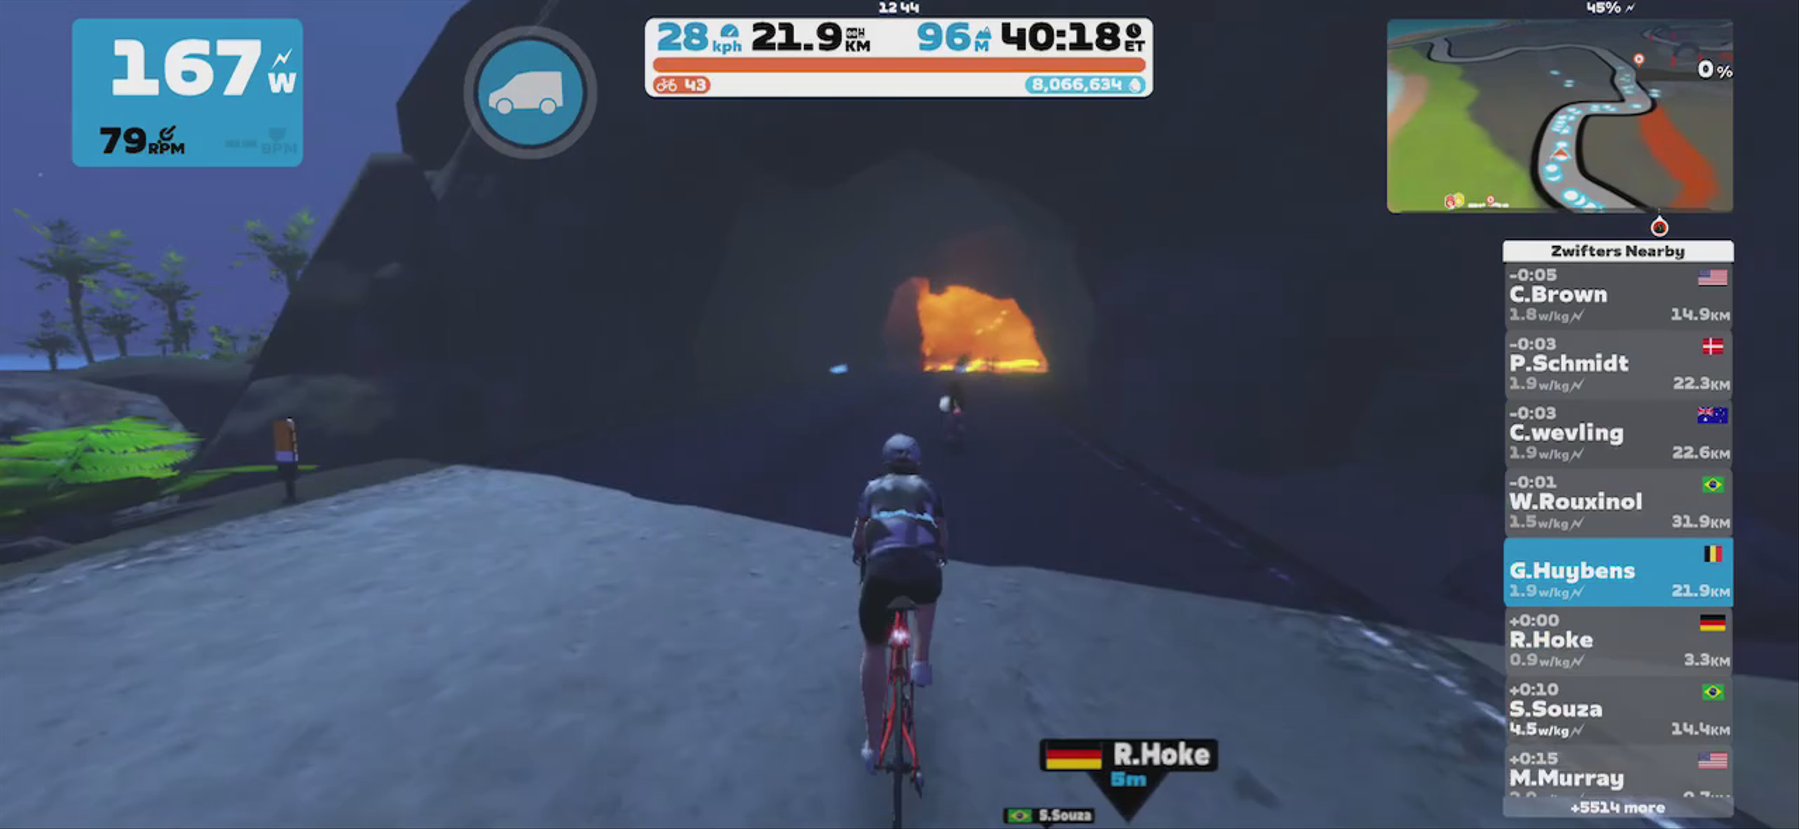 Zwift - Volcano Flat in Watopia with Miguel